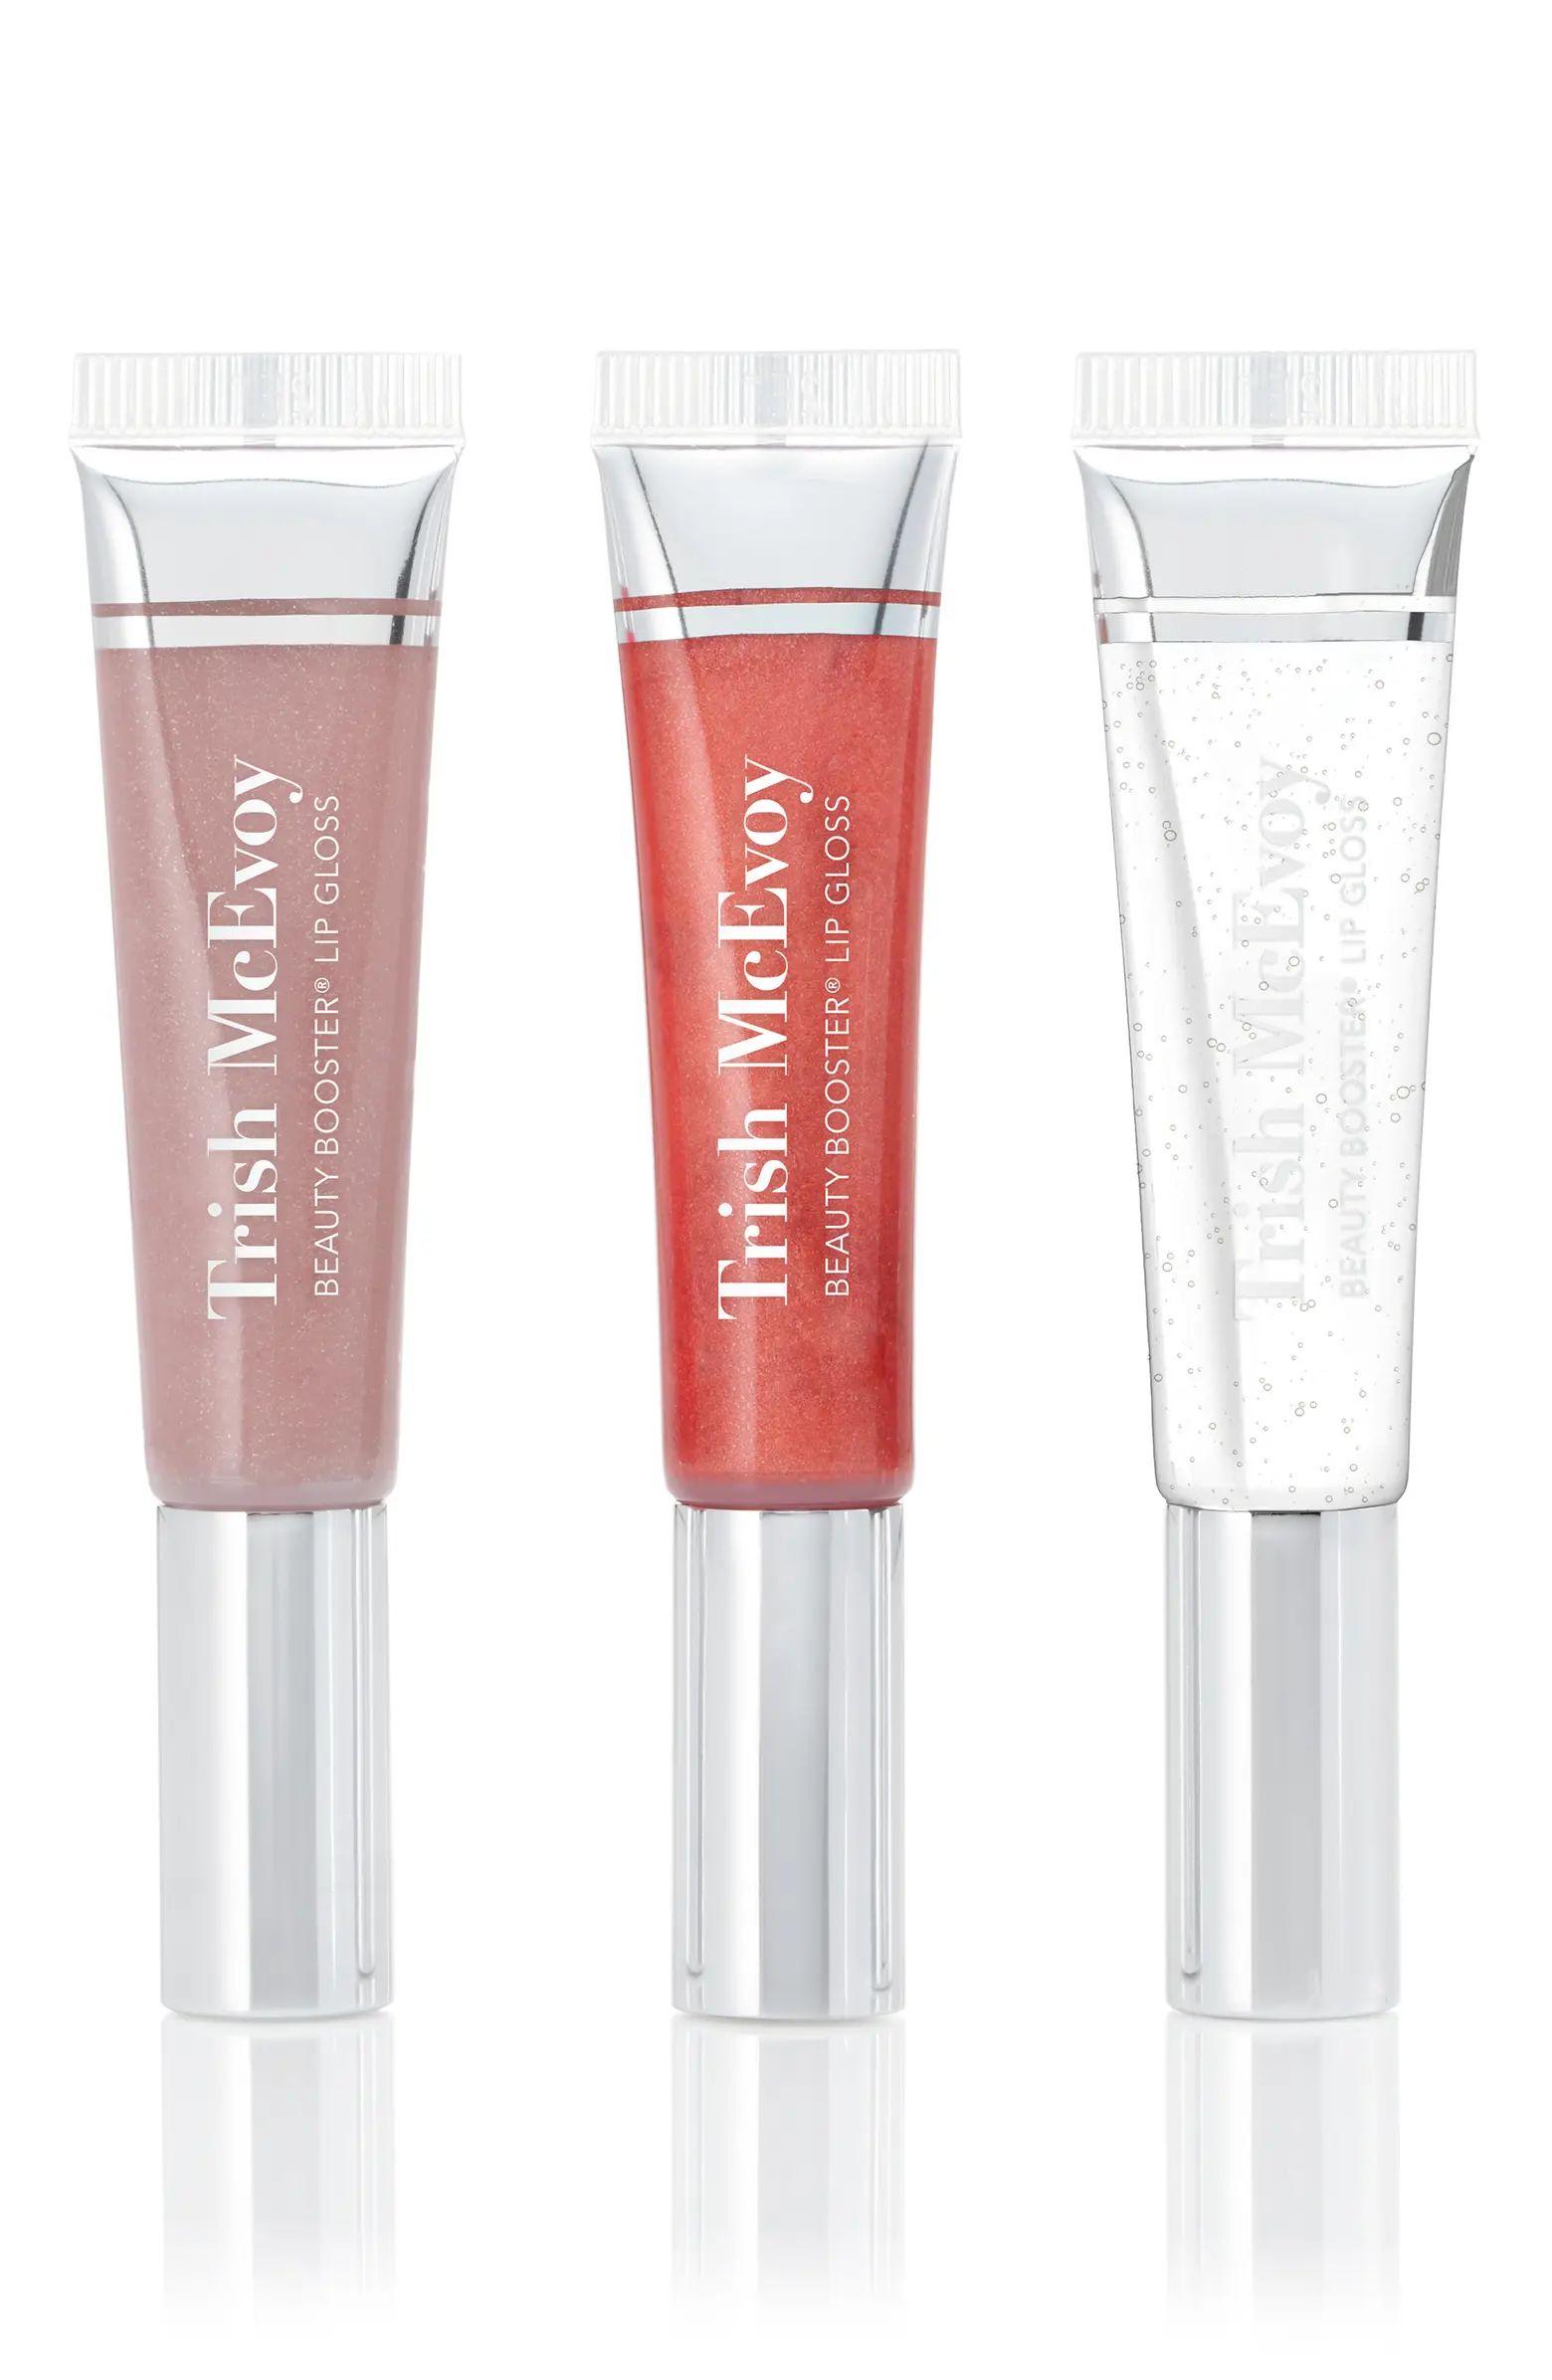 Beauty Booster® Lip Gloss Trio Set $81 Value | Nordstrom